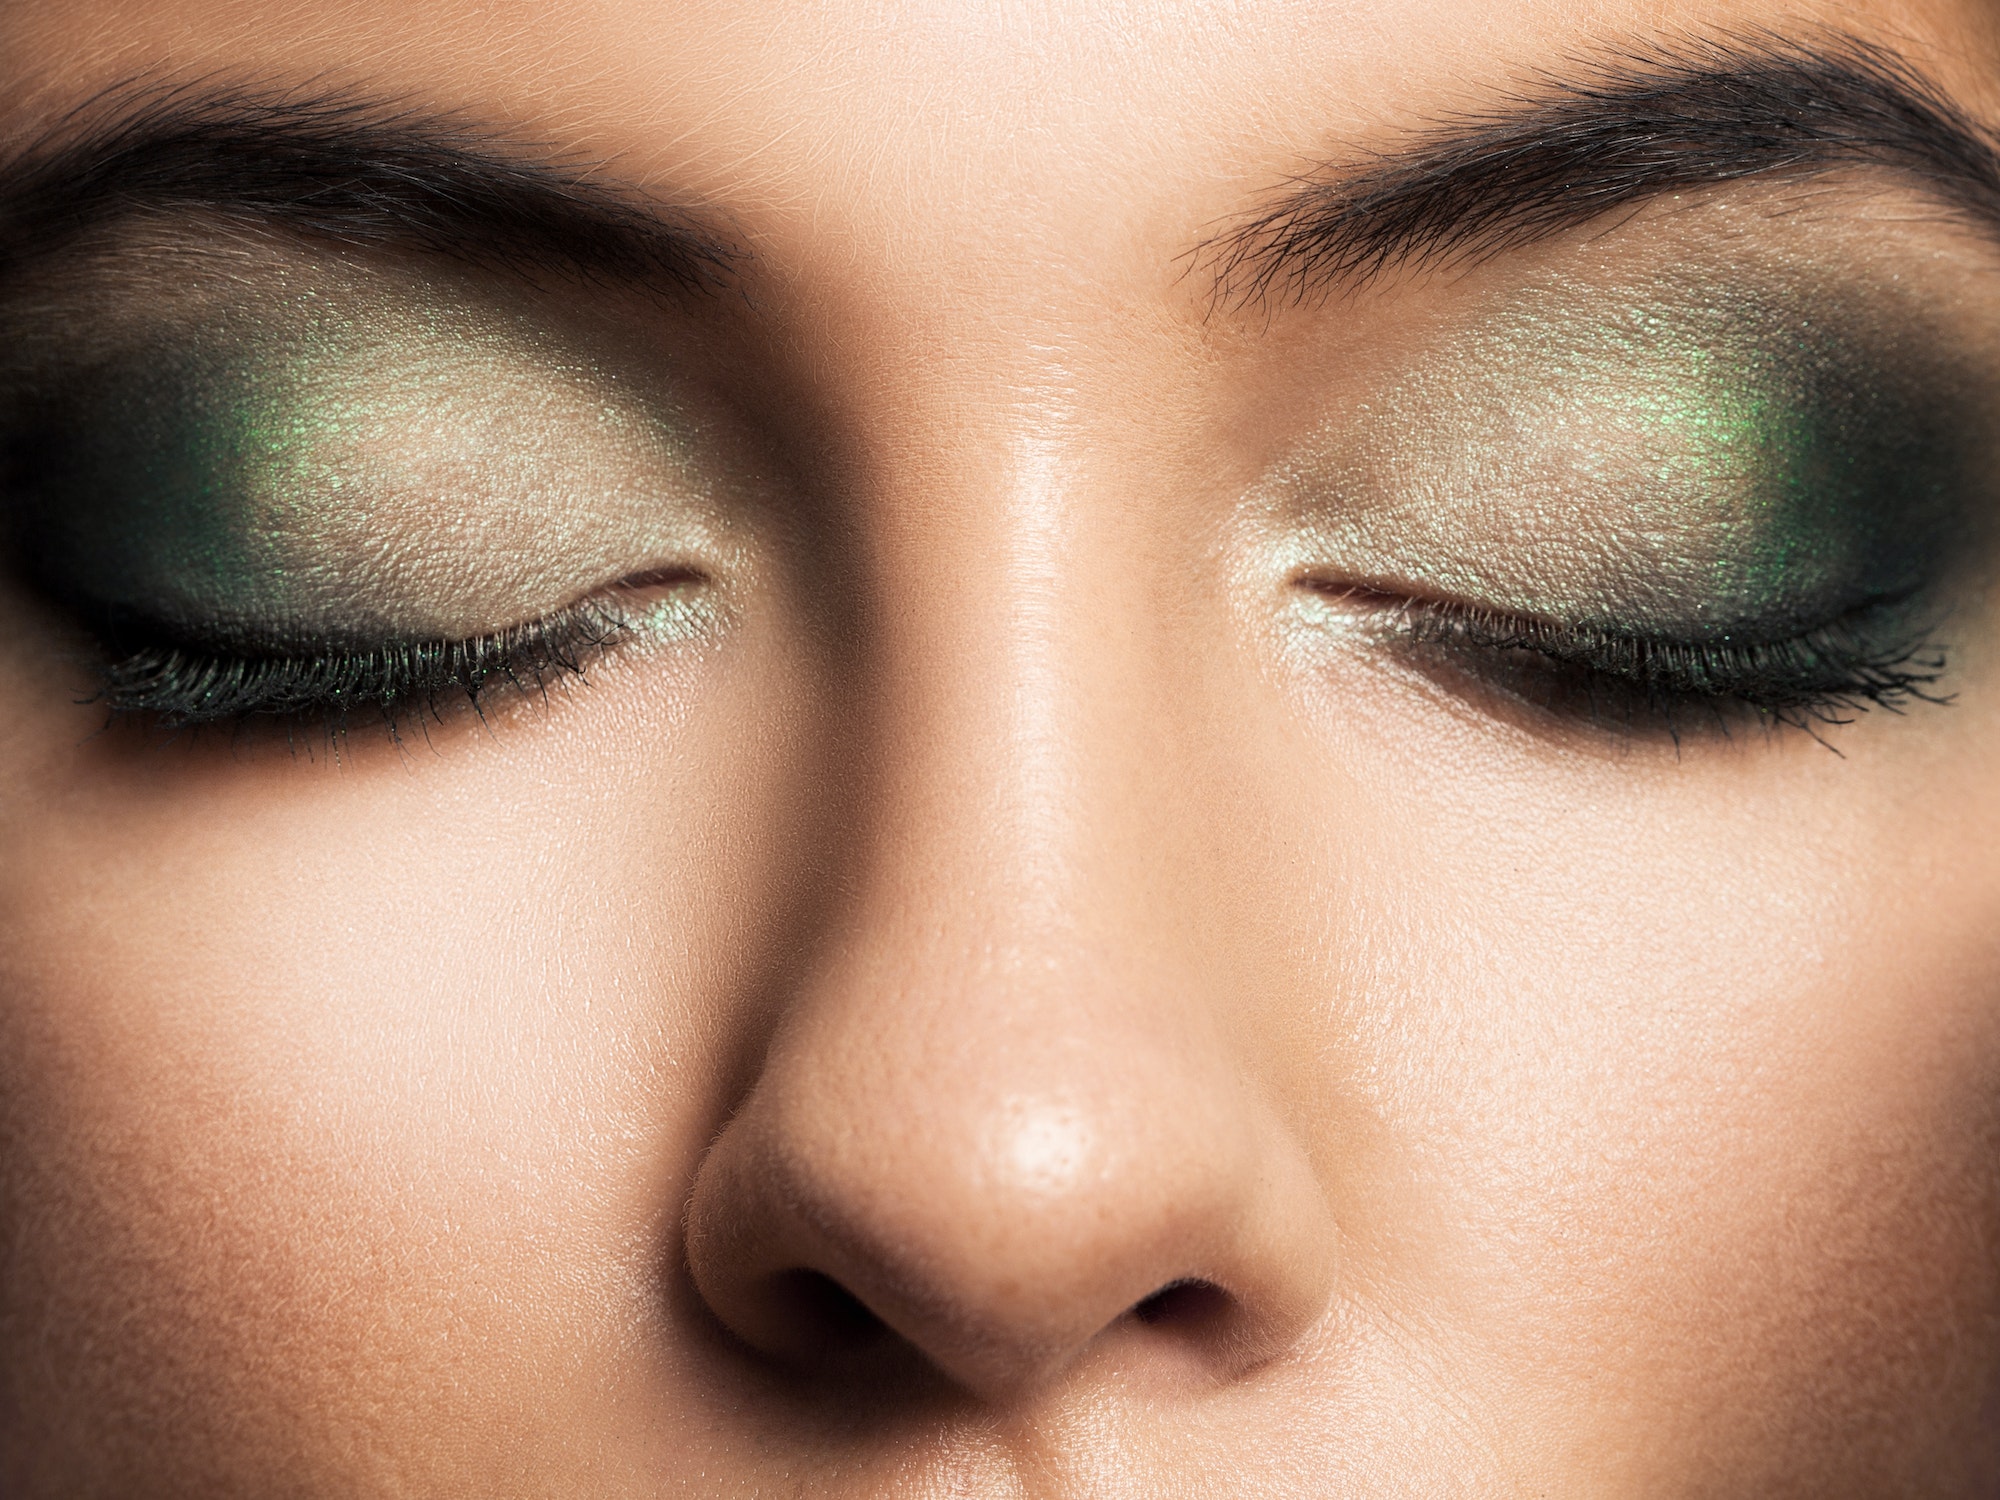 Read more about the article “Clean” eye make-up for sensitive eyes